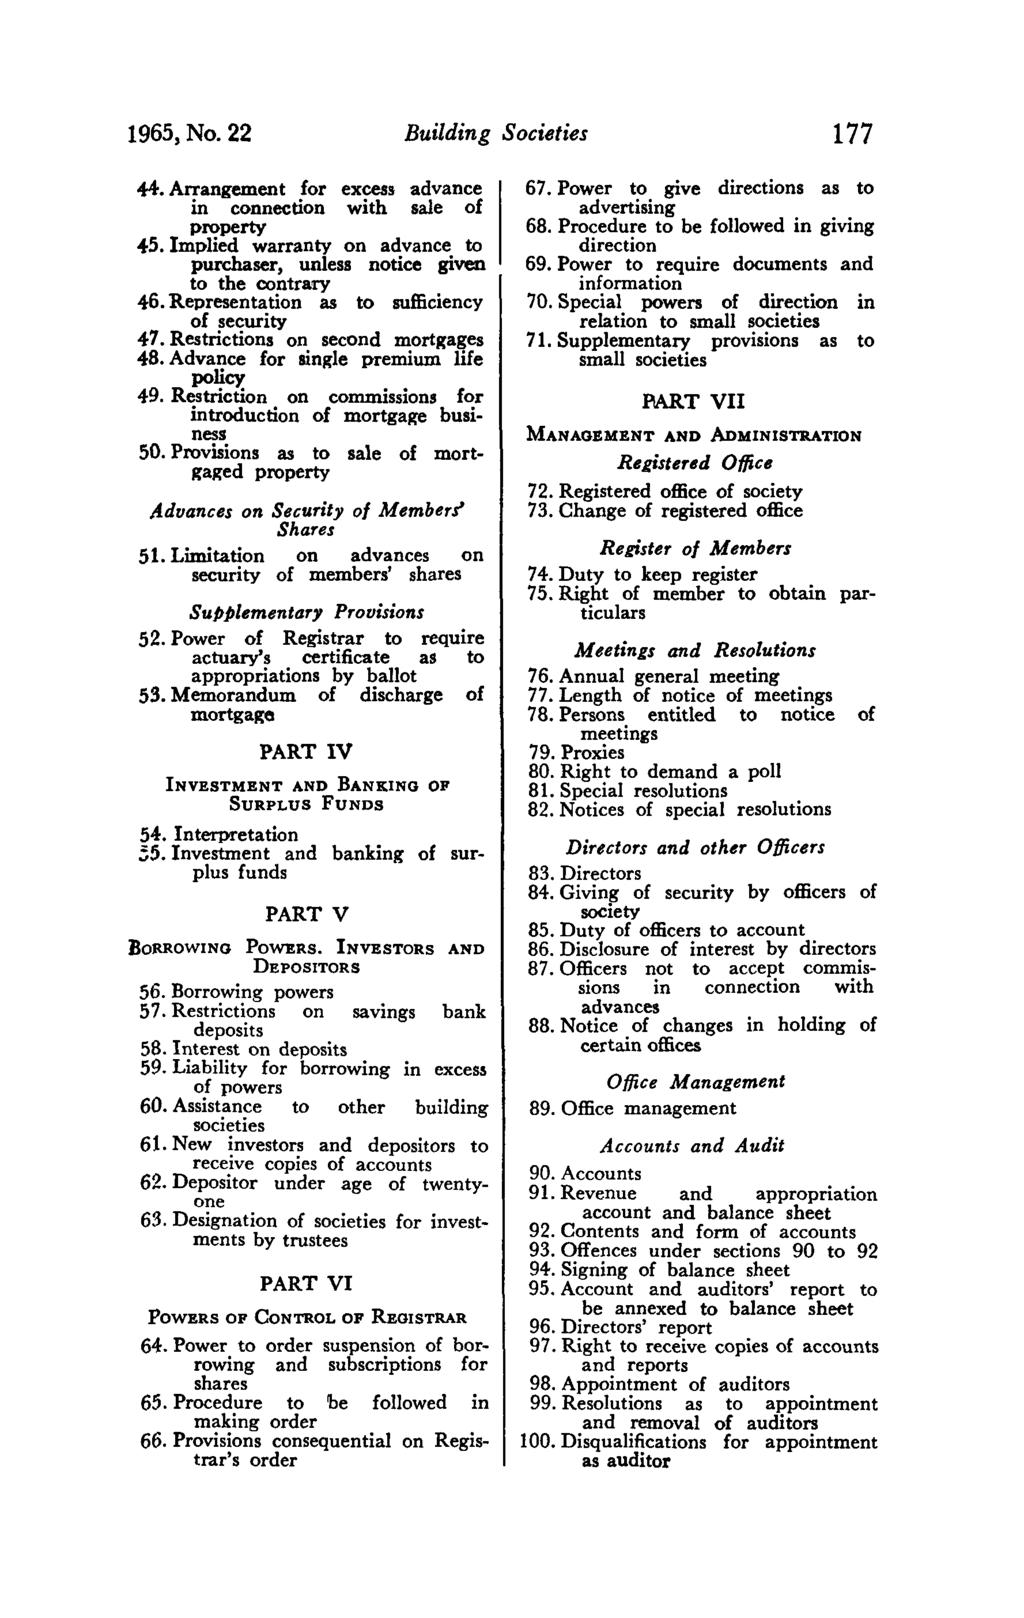 1965, No. 22 Building Societies 177 #. Arrangement for excess advance in connection with sale of property 45. Implied warranty on advance to purchaser, unless notice given to the contrary 46.